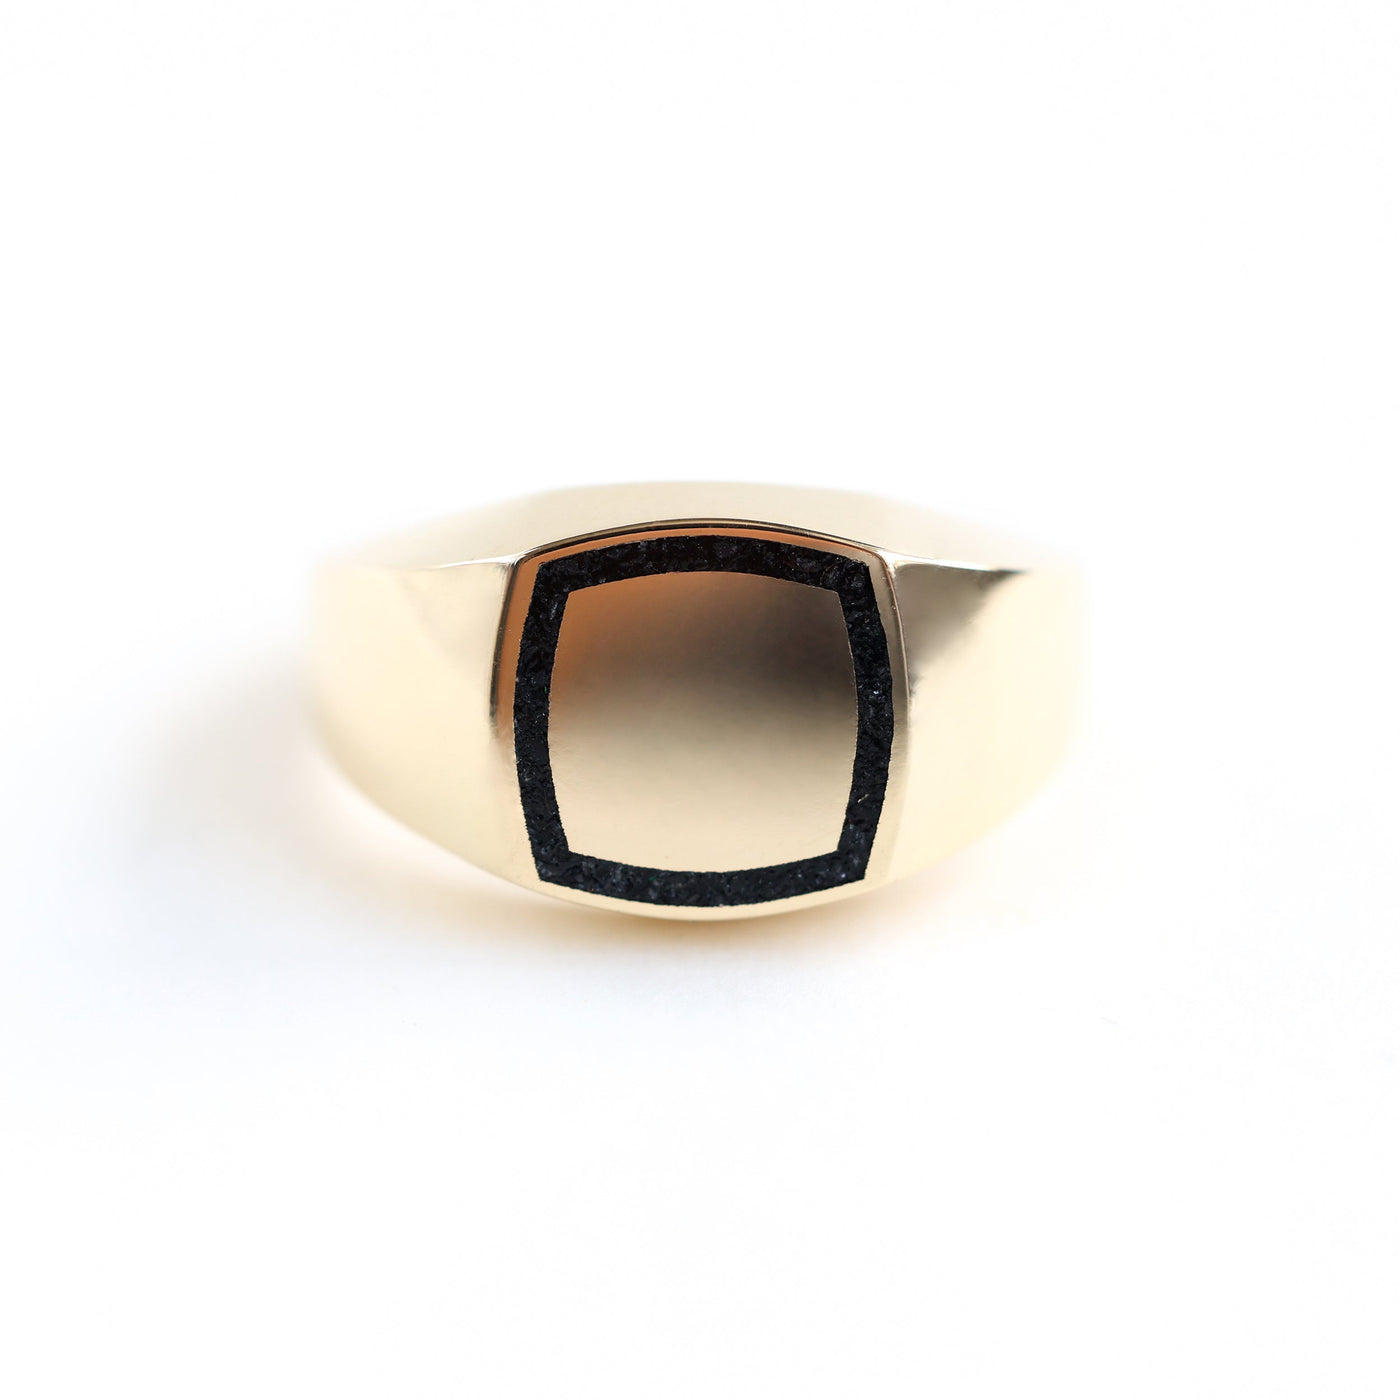 Close-up of a Brad gold inlay signet ring showcasing its intricate details.